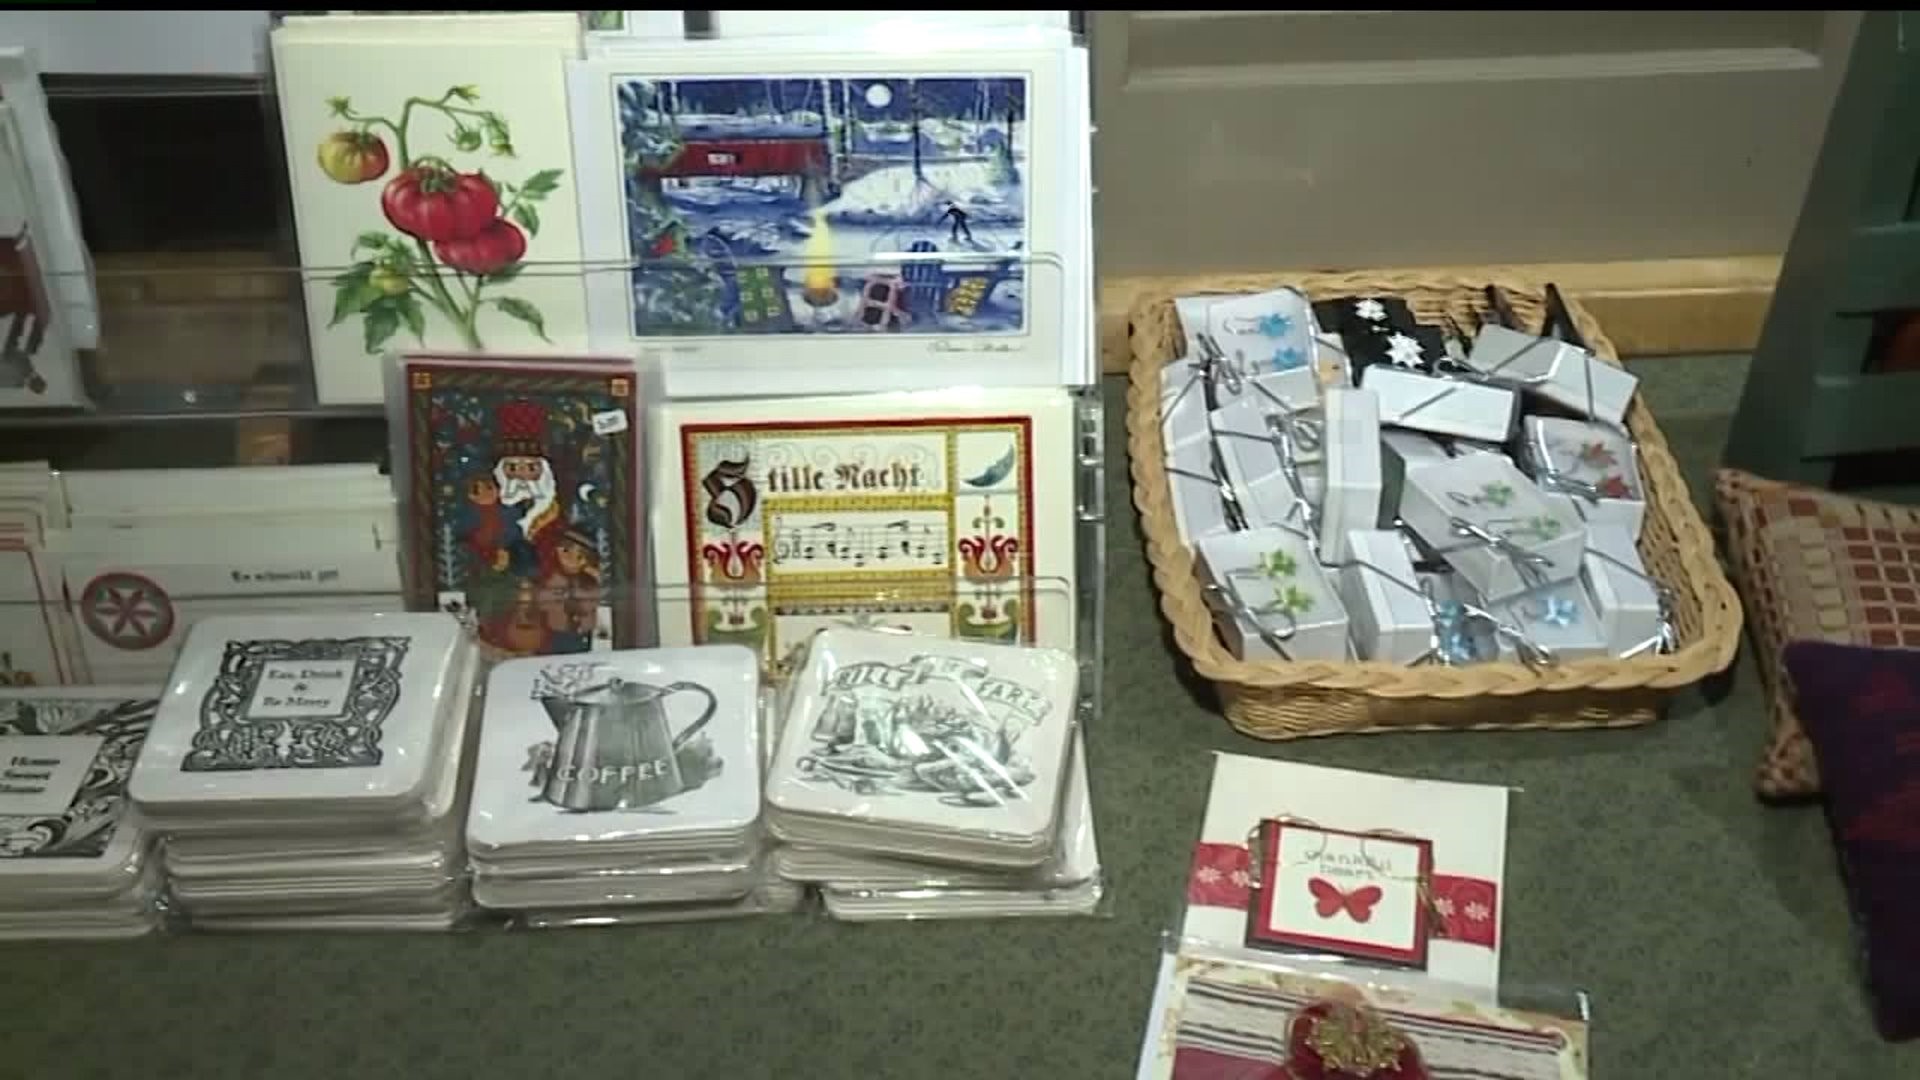 The Holiday Marketplace kicks off today at the Village Square of the State Museum of Pennsylvania in Harrisburg